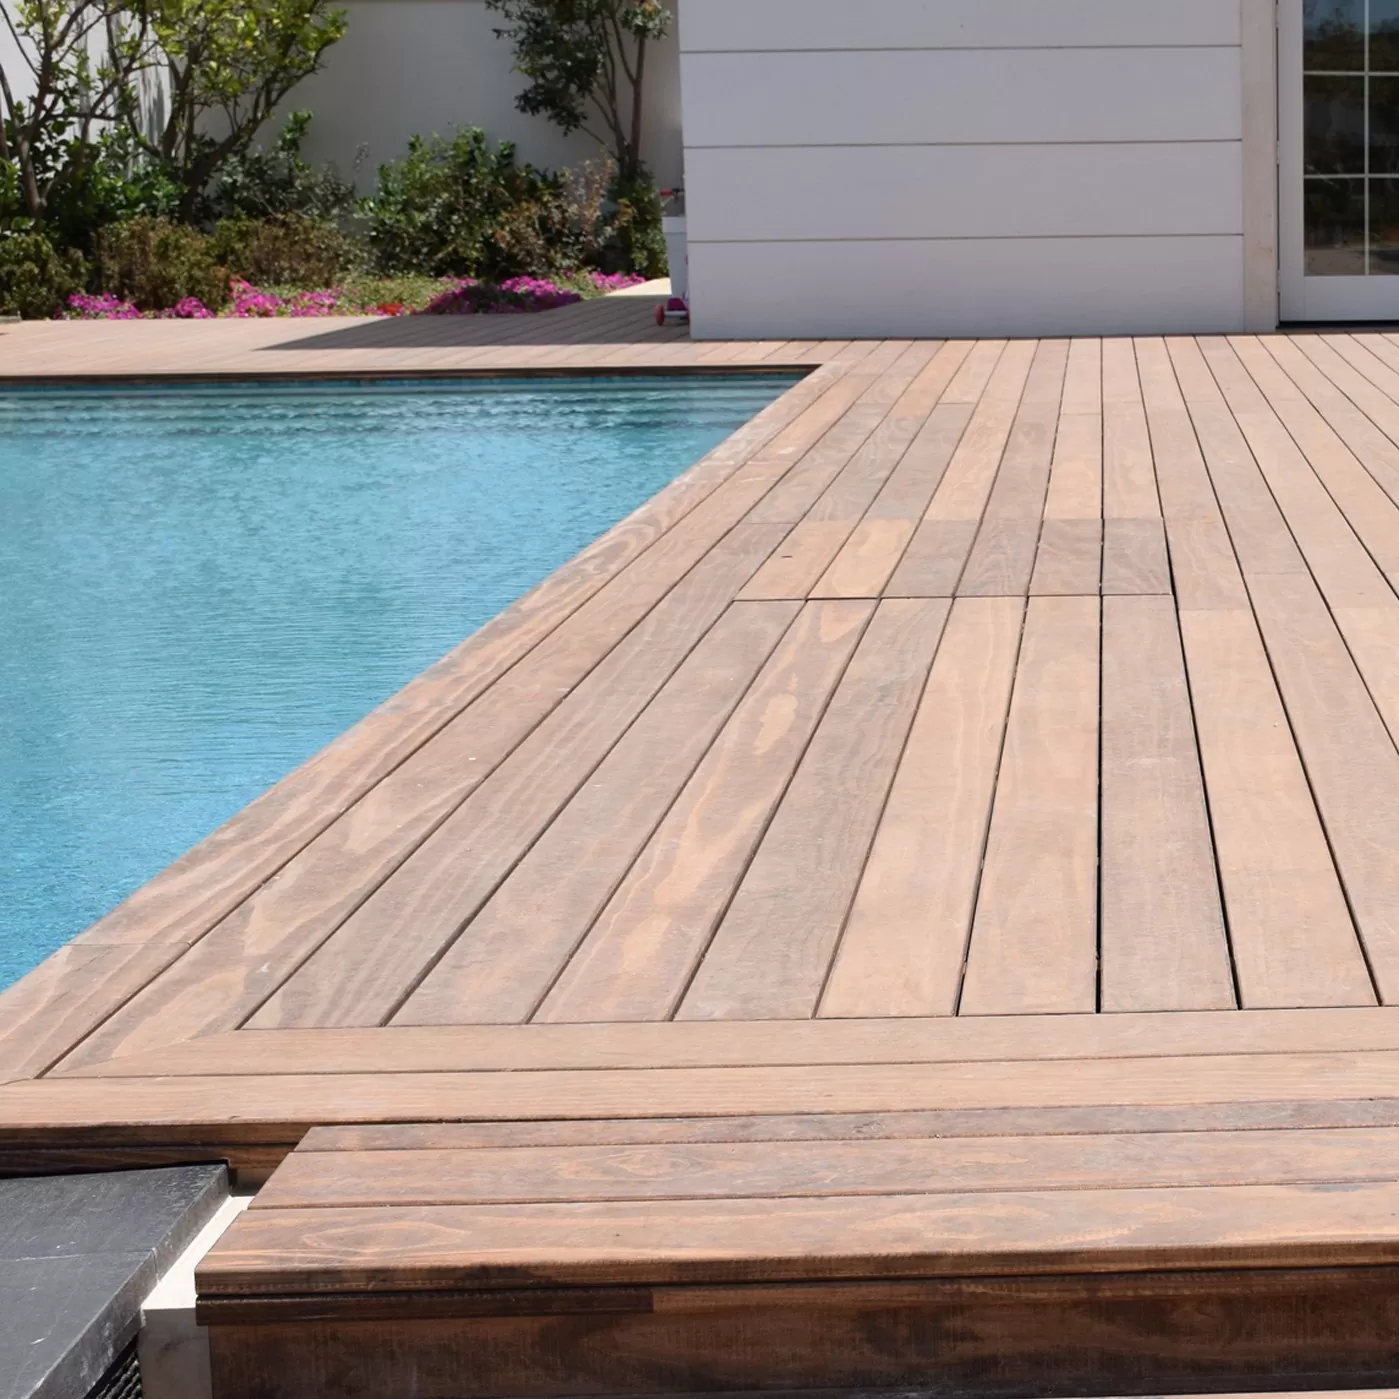 10 Wood Deck Swimming Pools You Want To, Wood Deck Around Pool Ideas